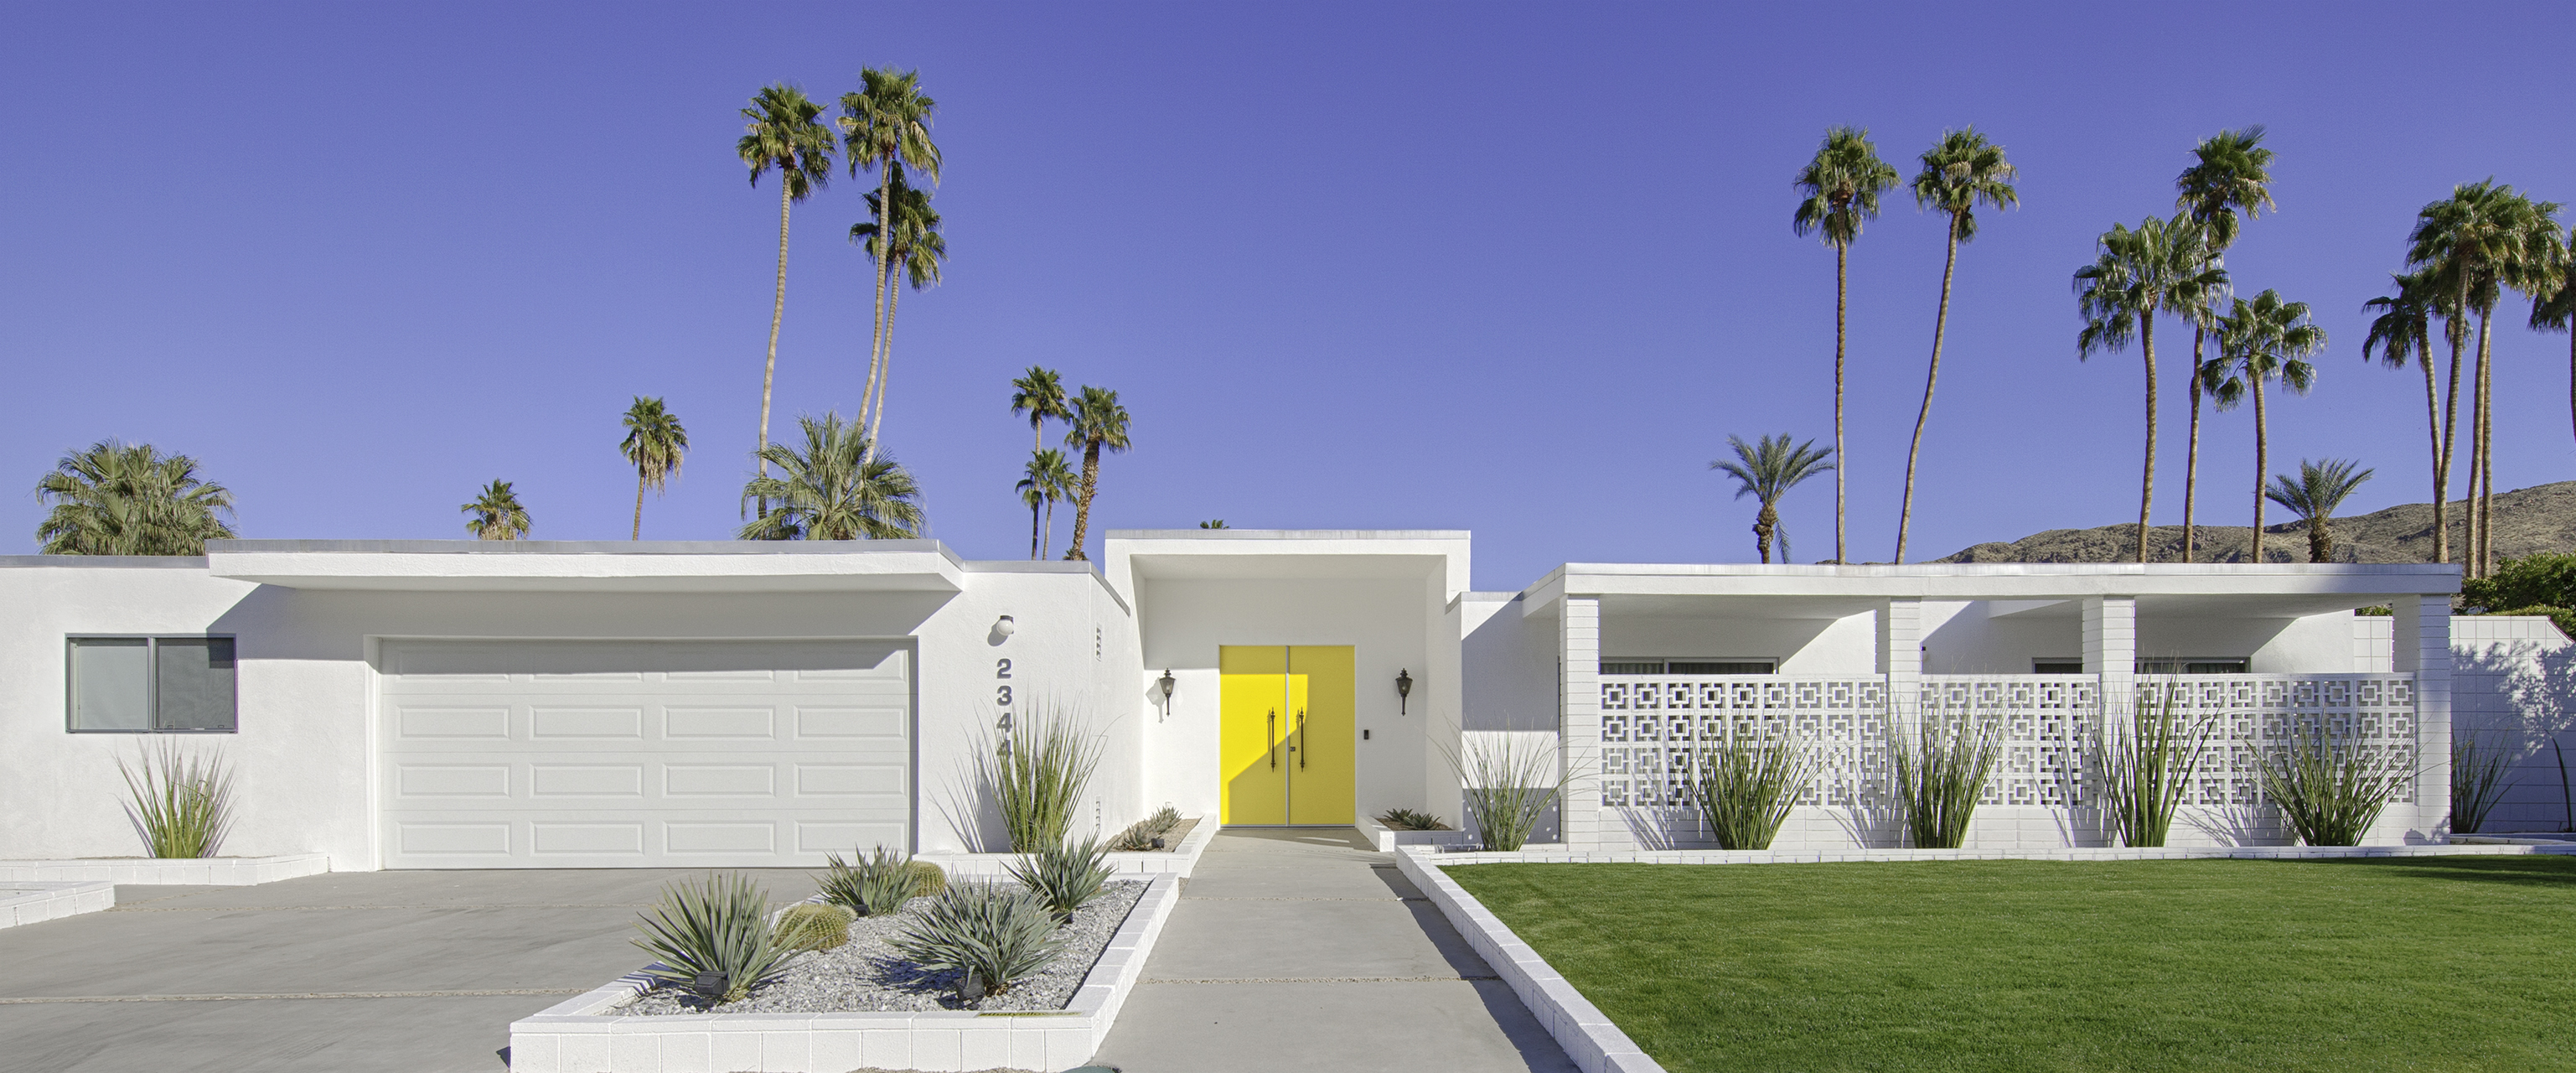 homes with pools in palm springs, palm springs real estate market